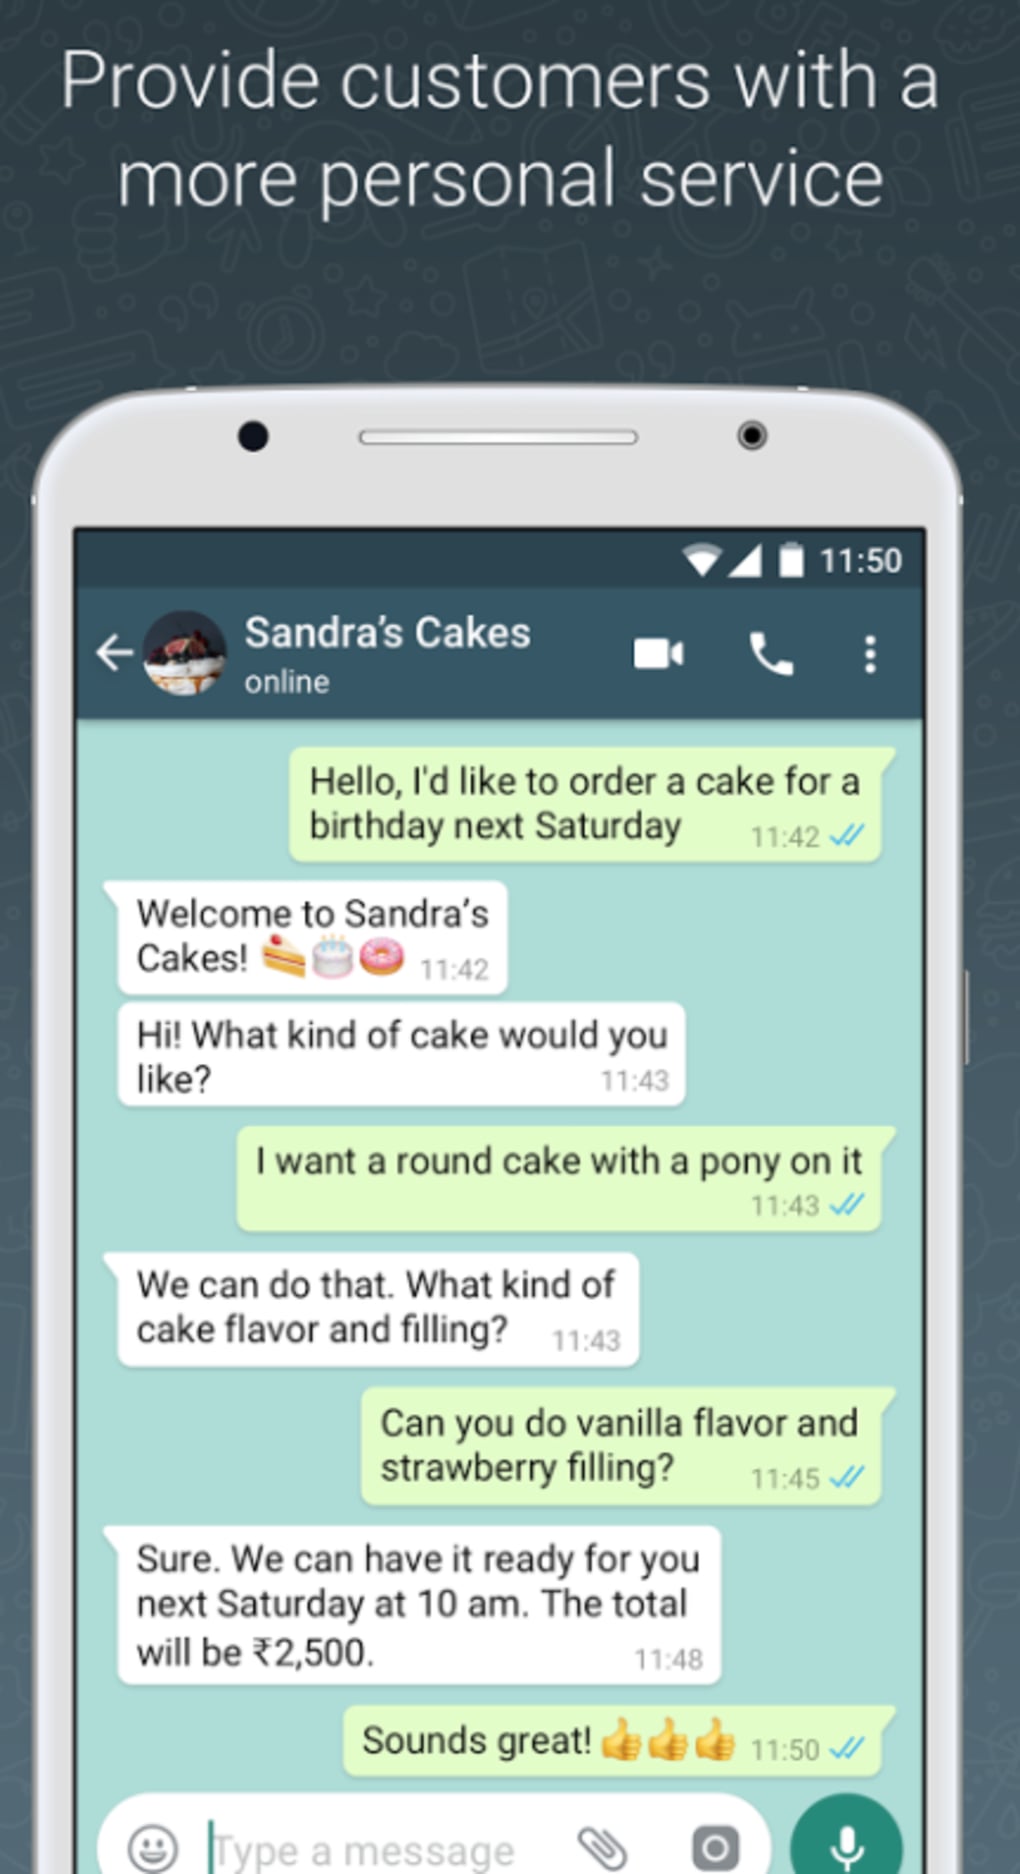 WhatsApp Business APK for Android - Download